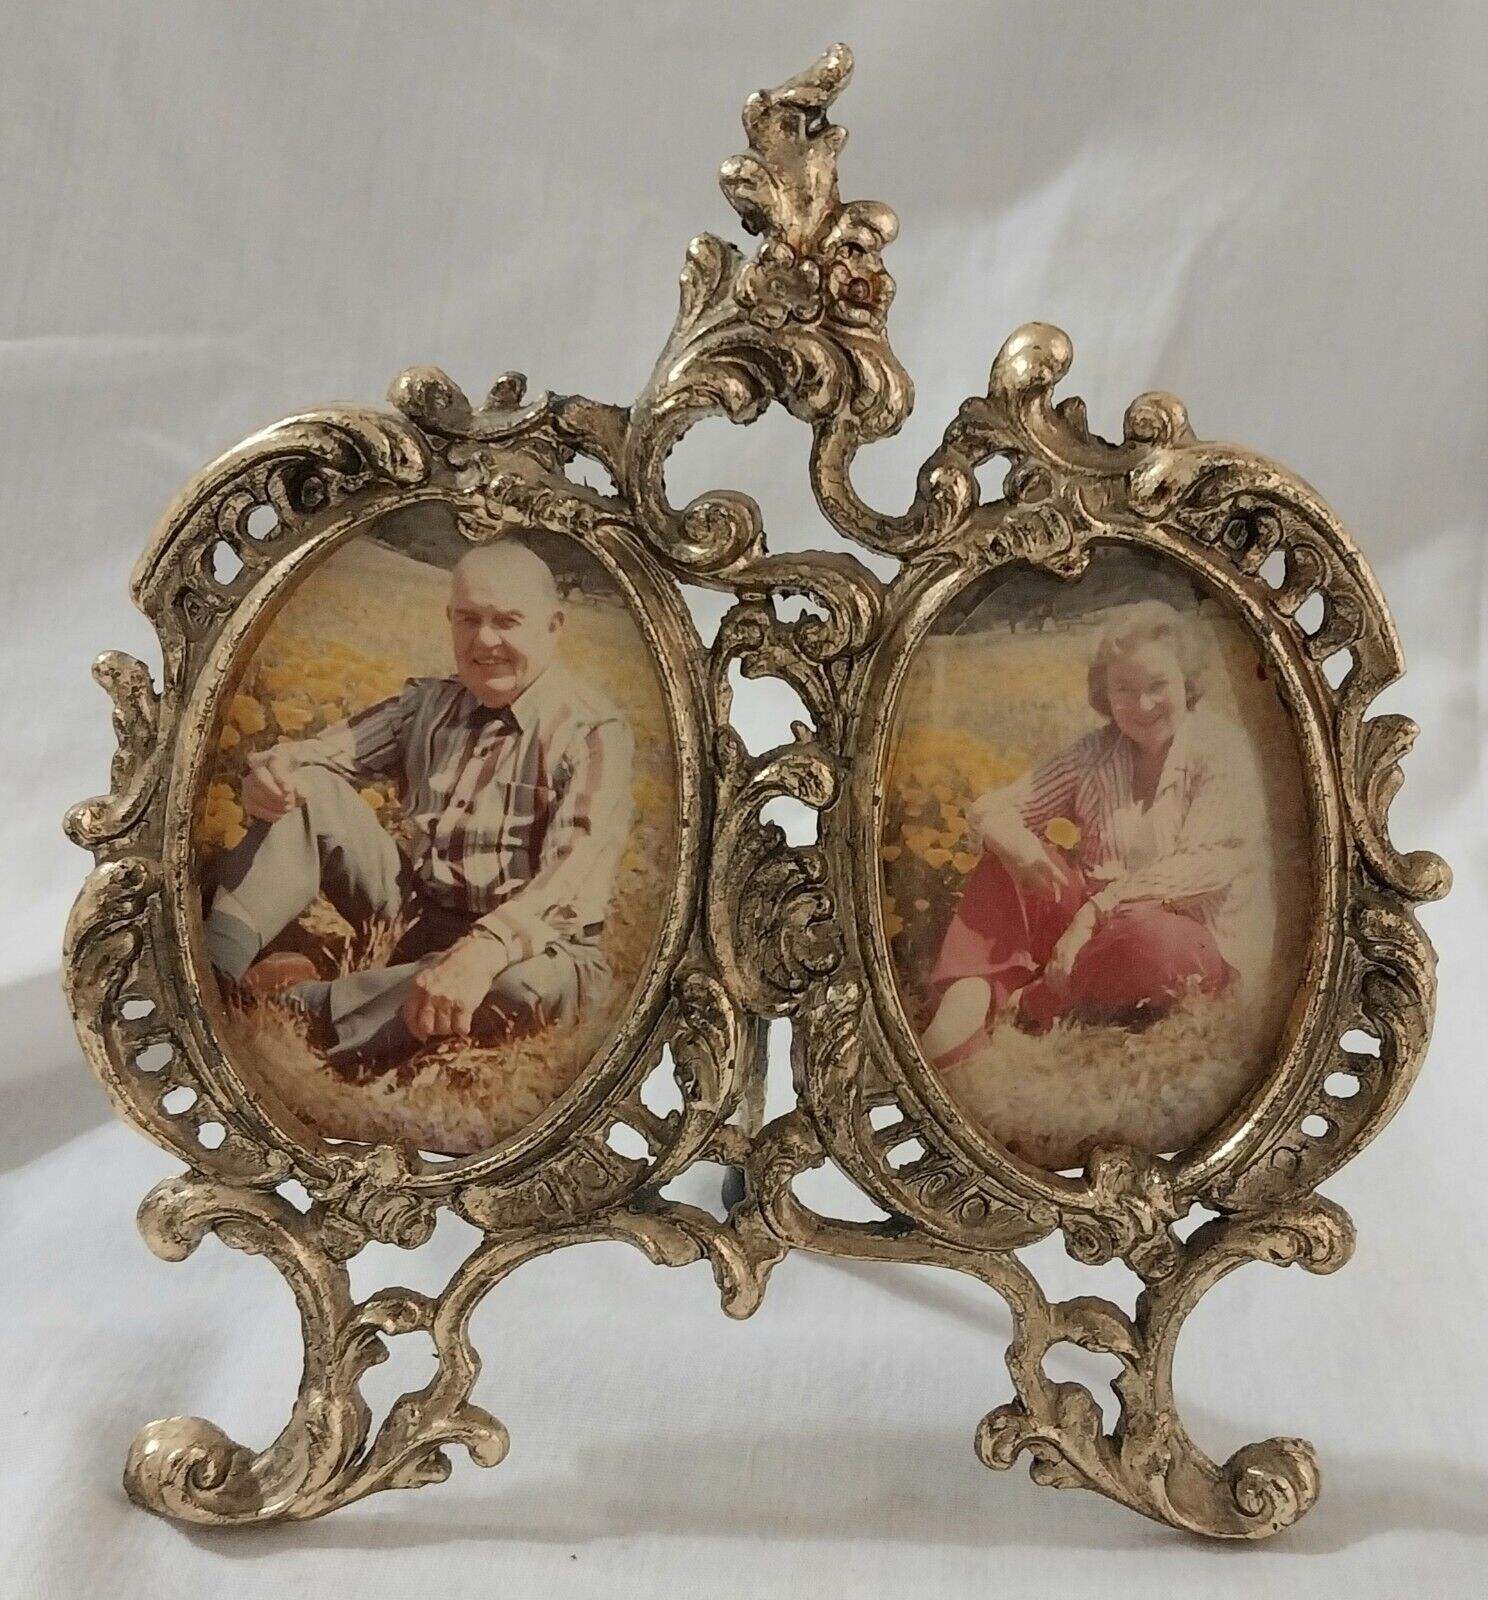 VINTAGE CHIC VICTORAIN ORNATE GOLDGILT DOUBLE PICTURE FRAME SELF STANDING SHABBY